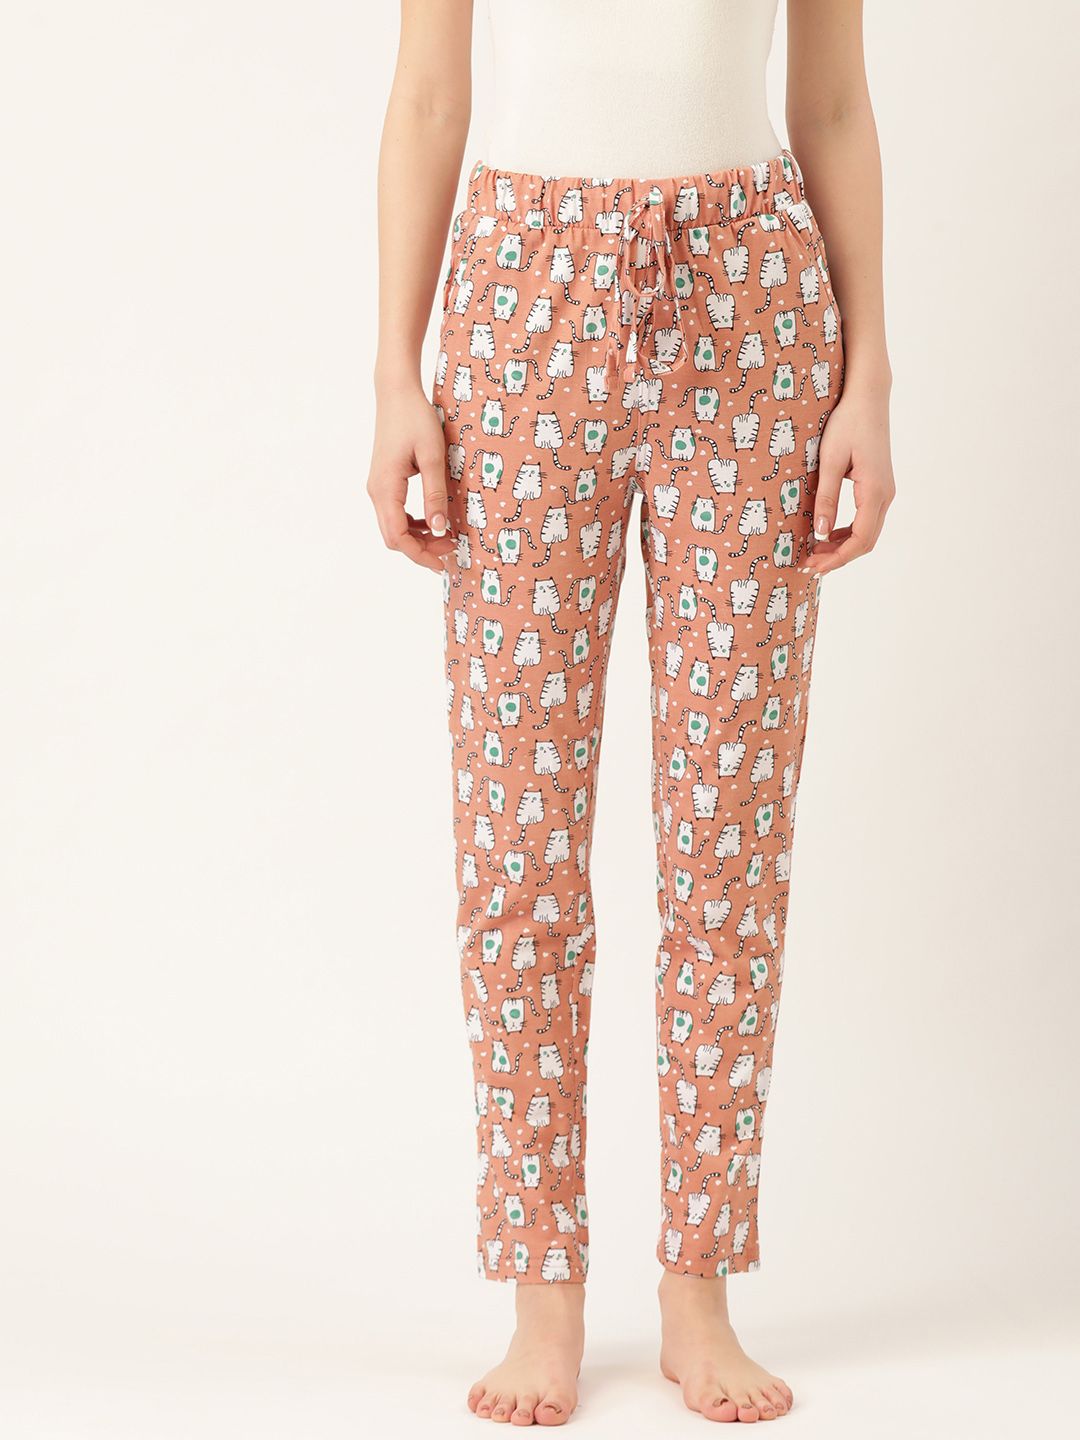 Sweet Dreams Peach-Coloured & White Cat Printed Cotton Lounge Pants Price in India